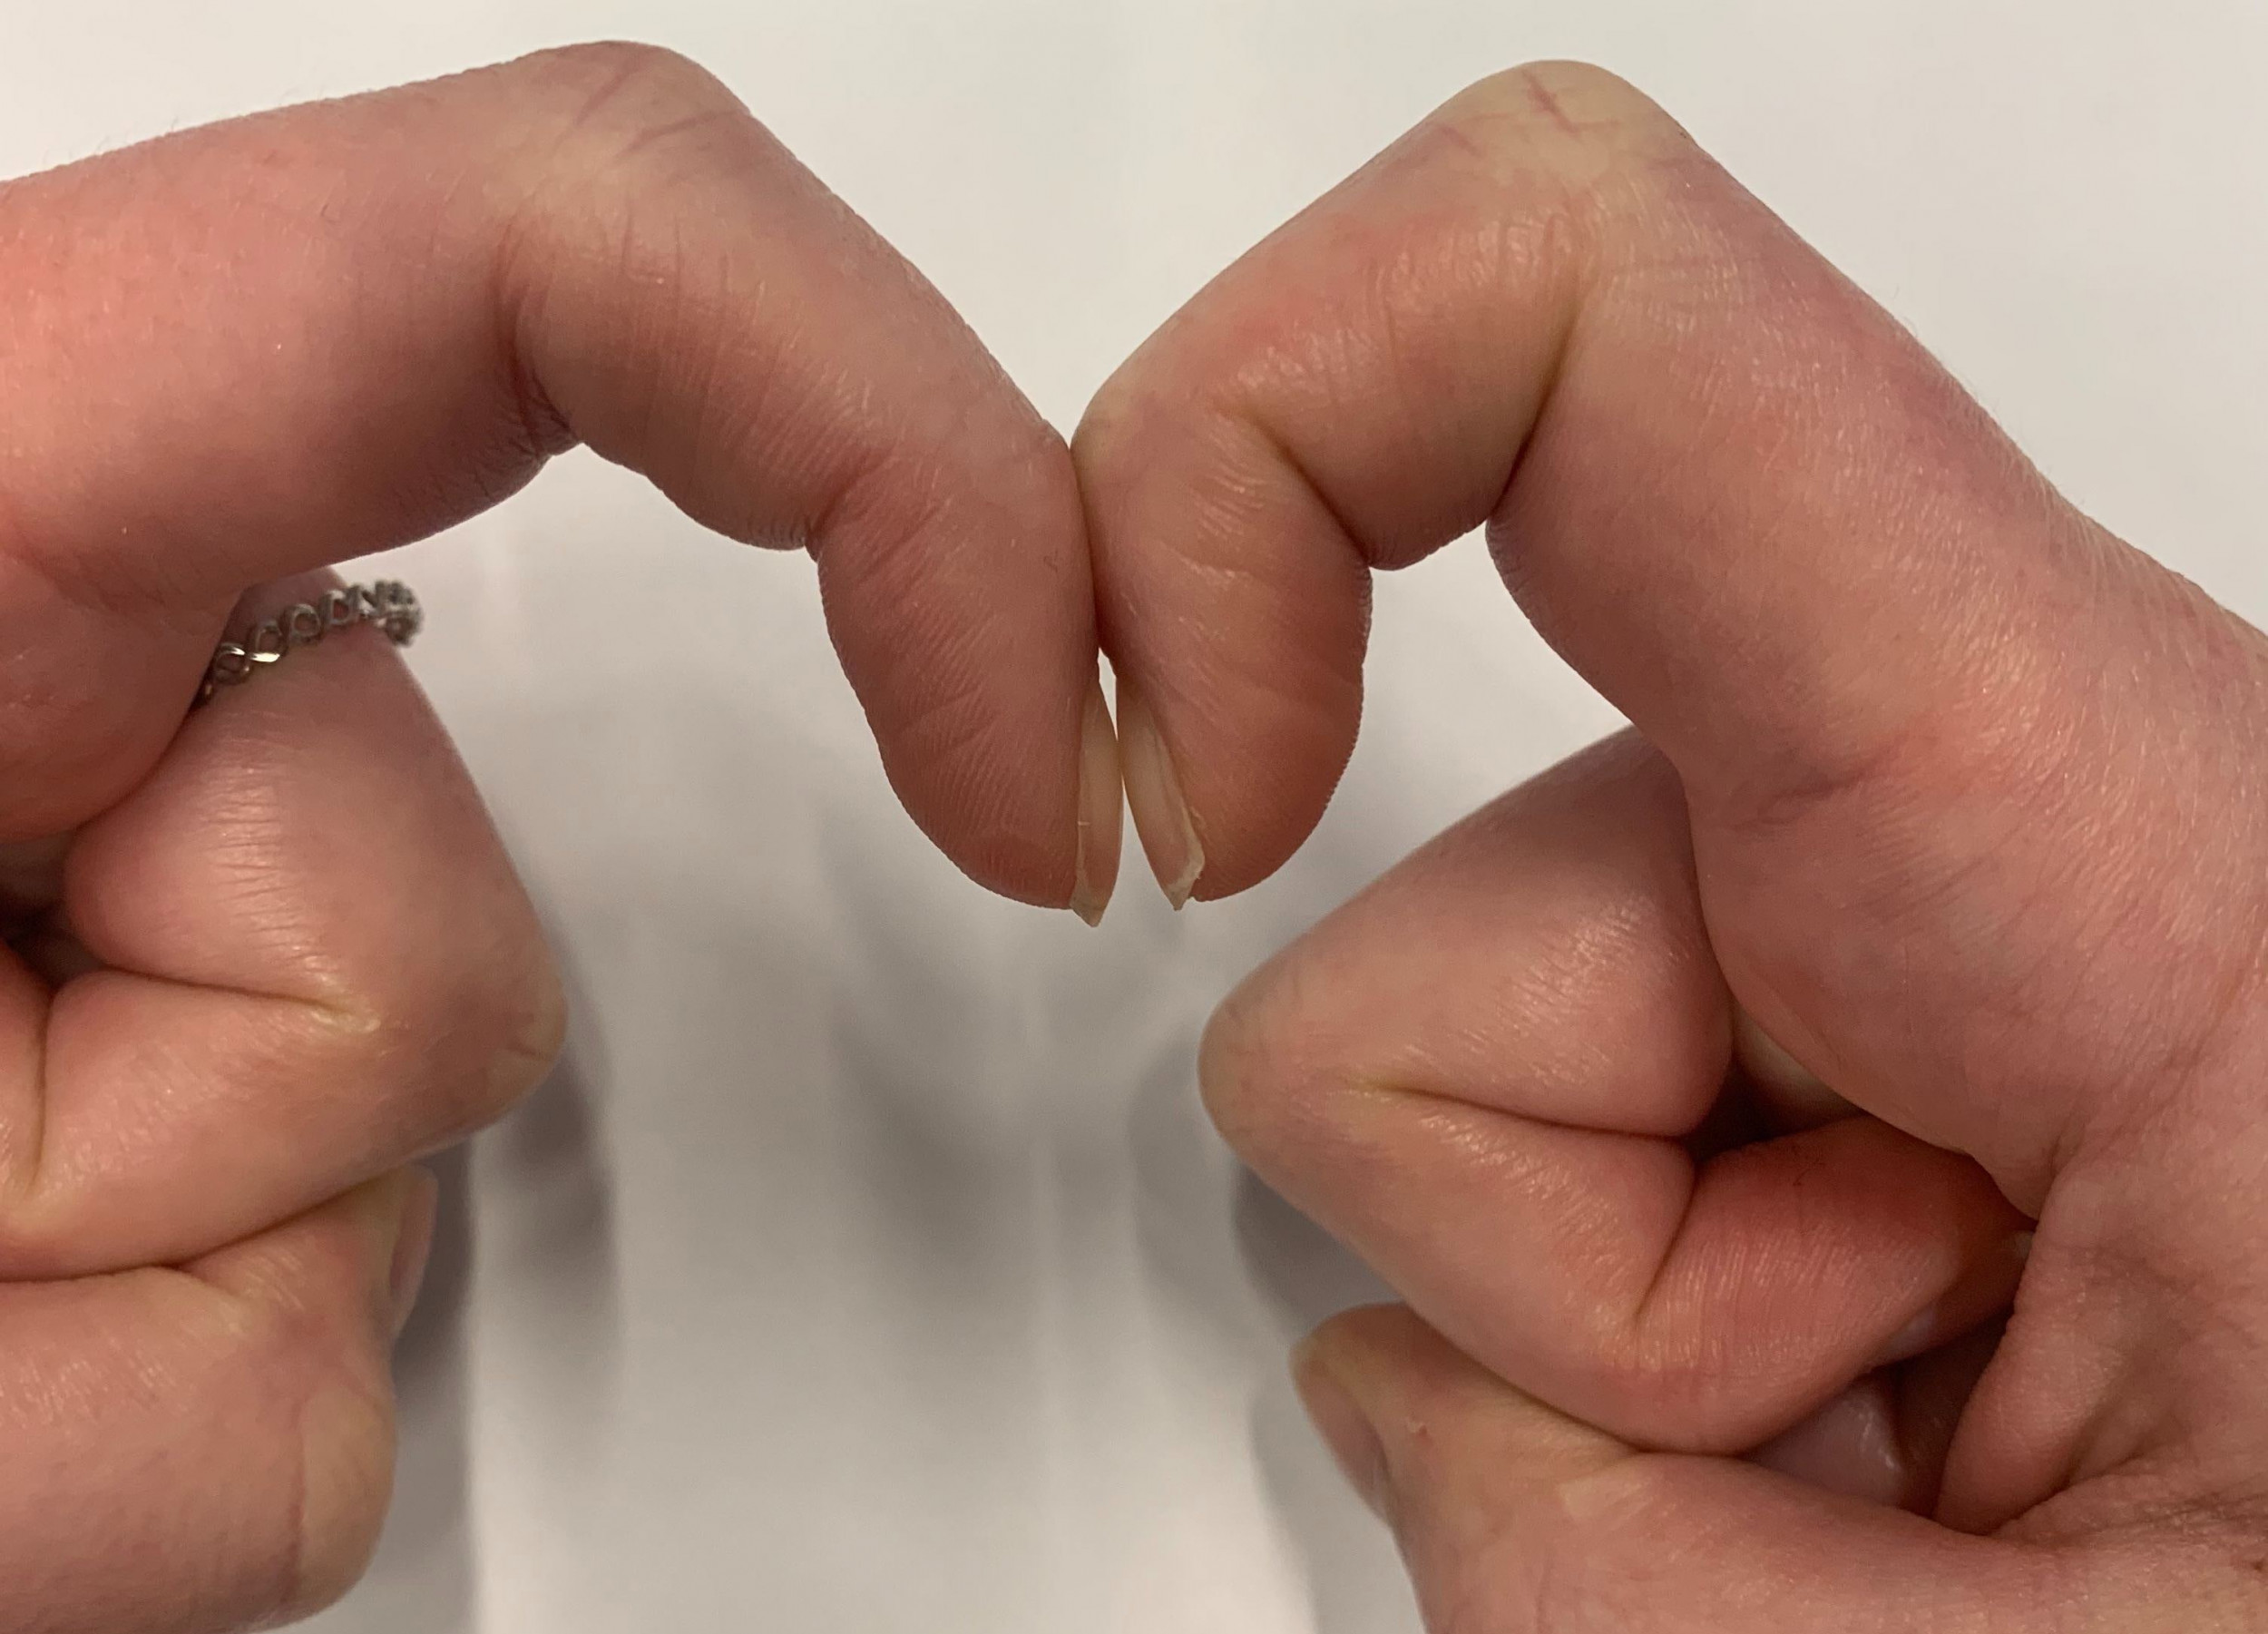 What precautions am I supposed to take after knowing that I have clubbed  nails? - Quora